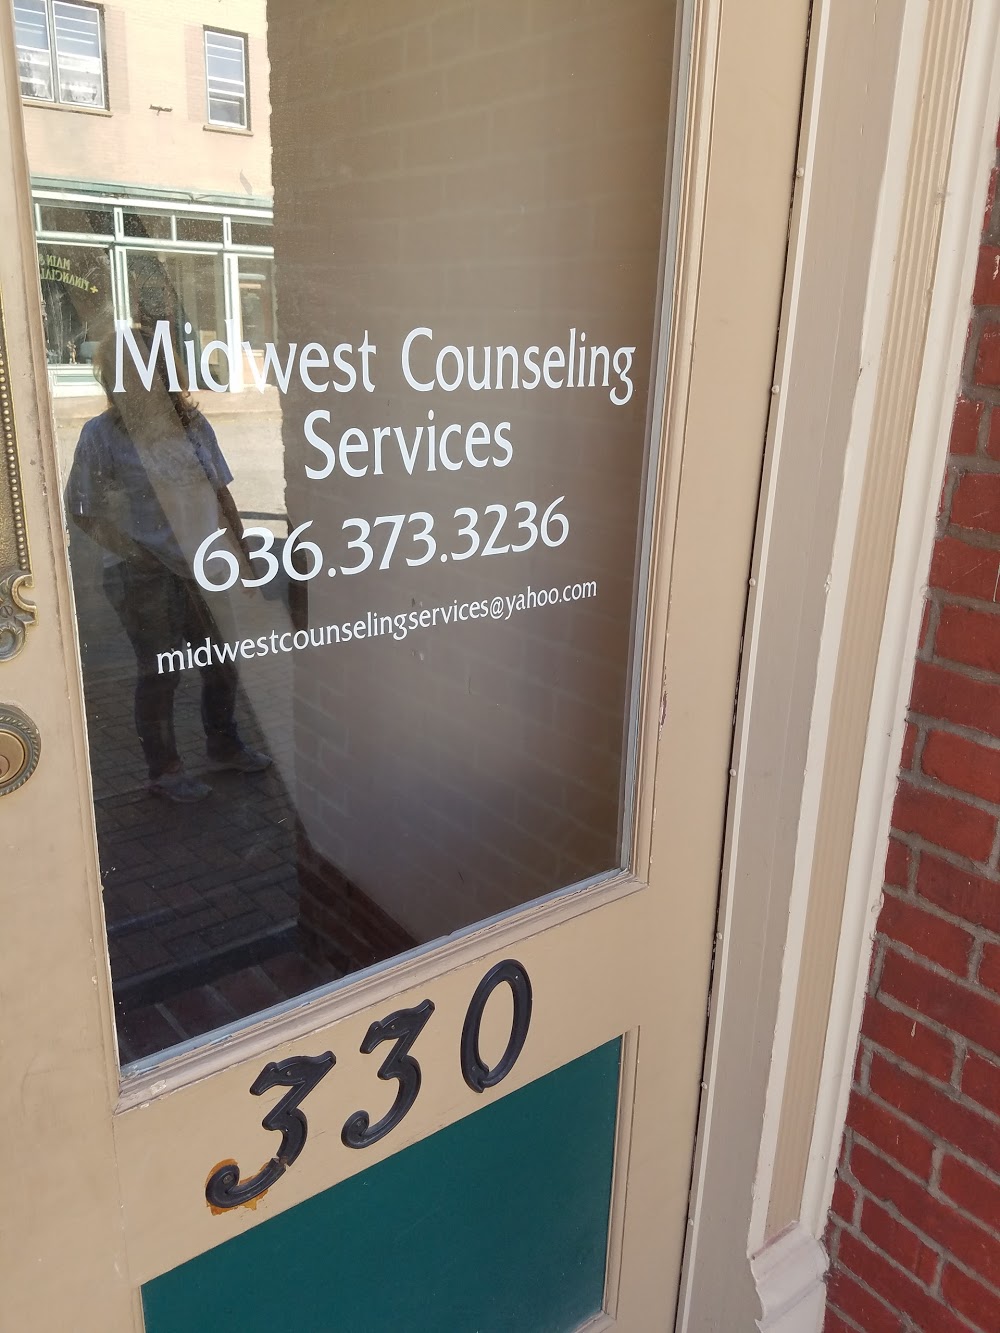 Midwest Counseling Services